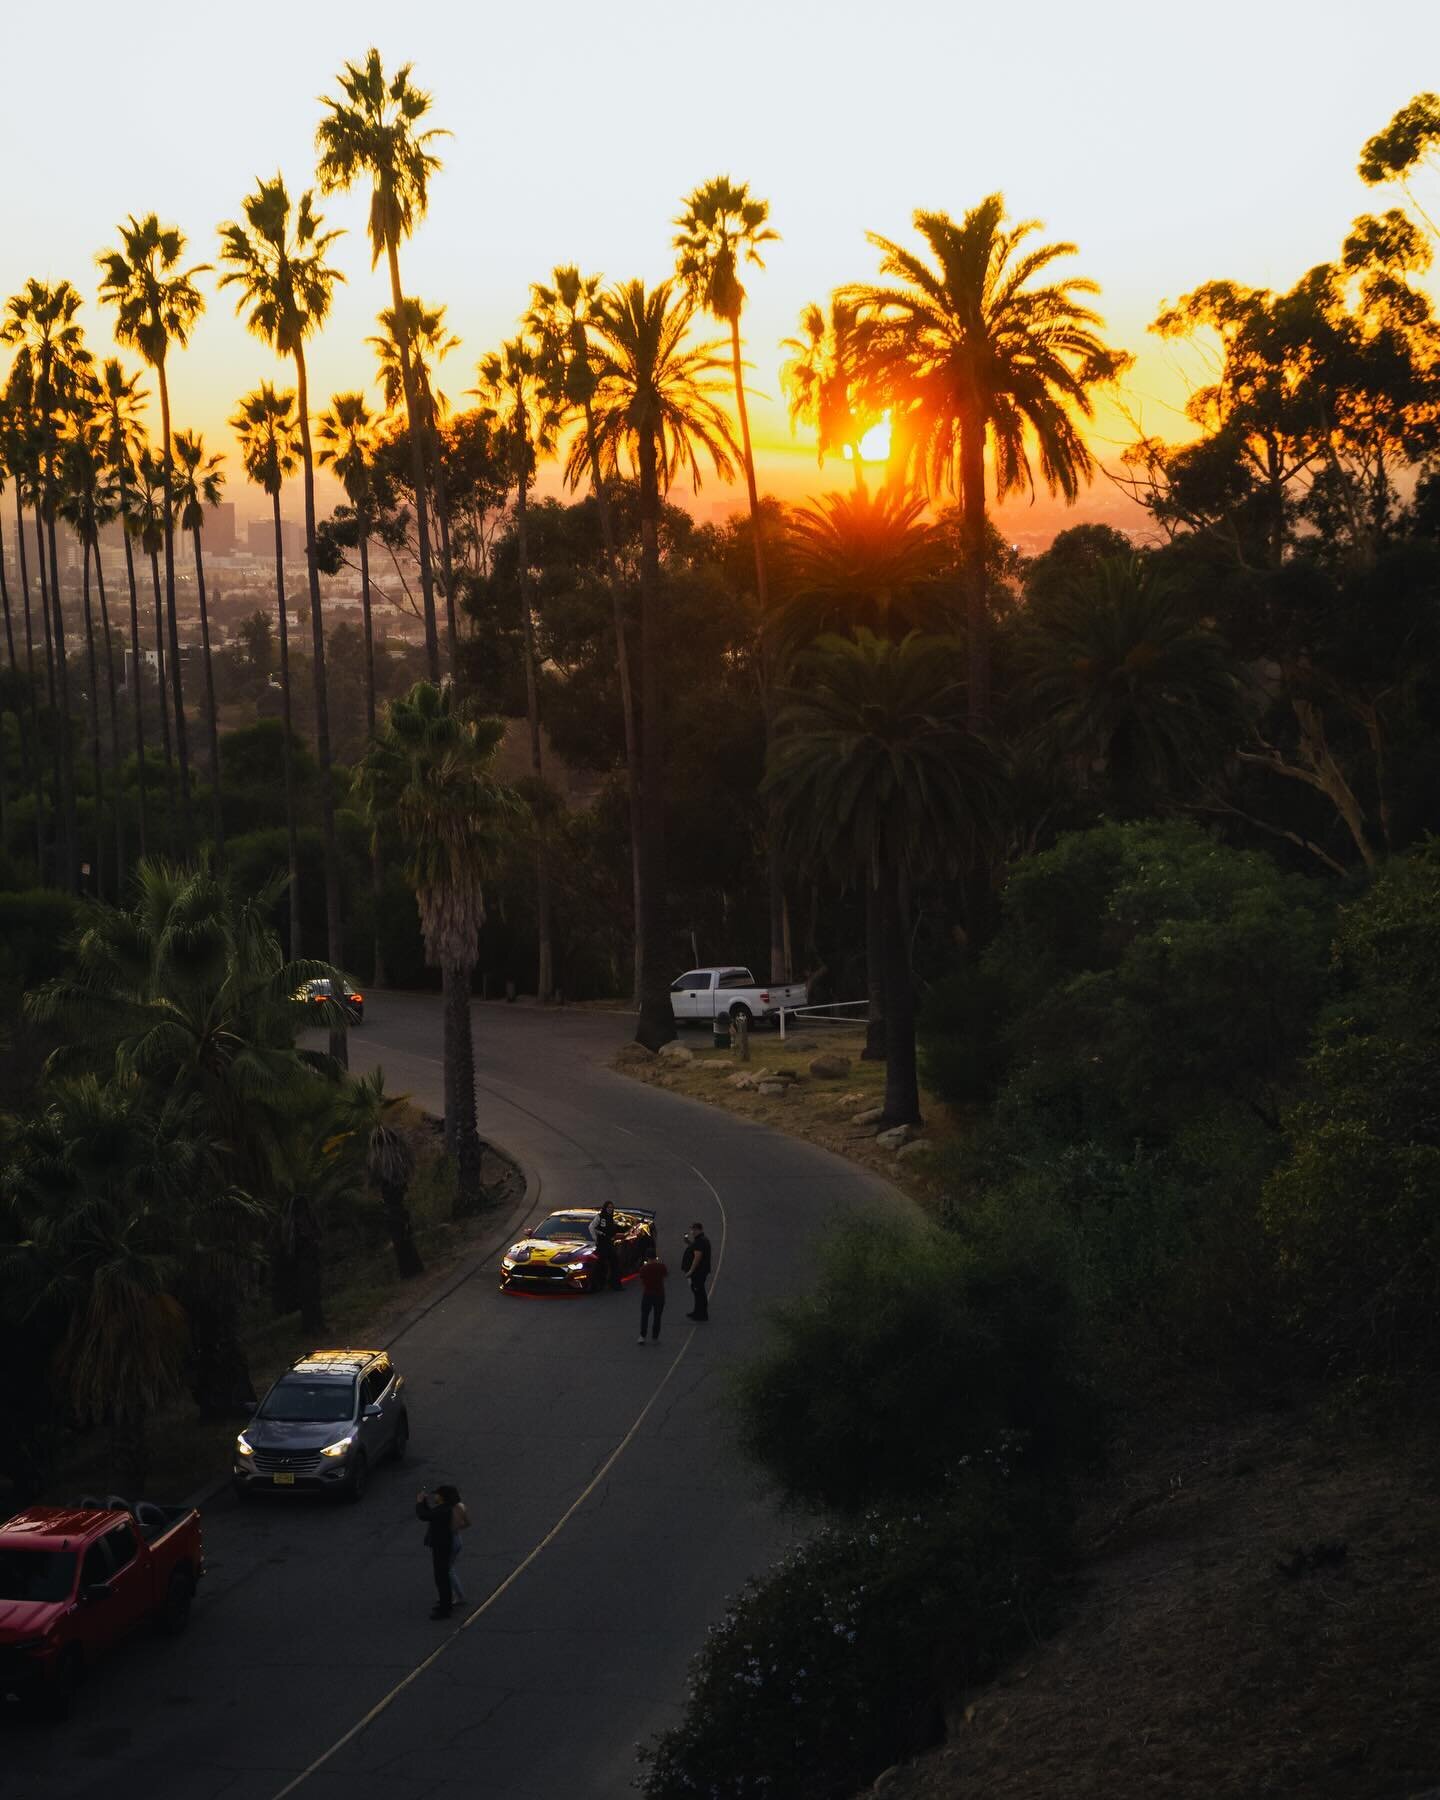 im ready for the sun to set at 7pm again☀️📸
 #LA

#losangelesphotographer #sonyalpha #sonyimages #losangeles #palmtrees #sunset #relaxing #weekend #ricardosimages #landscapephotography